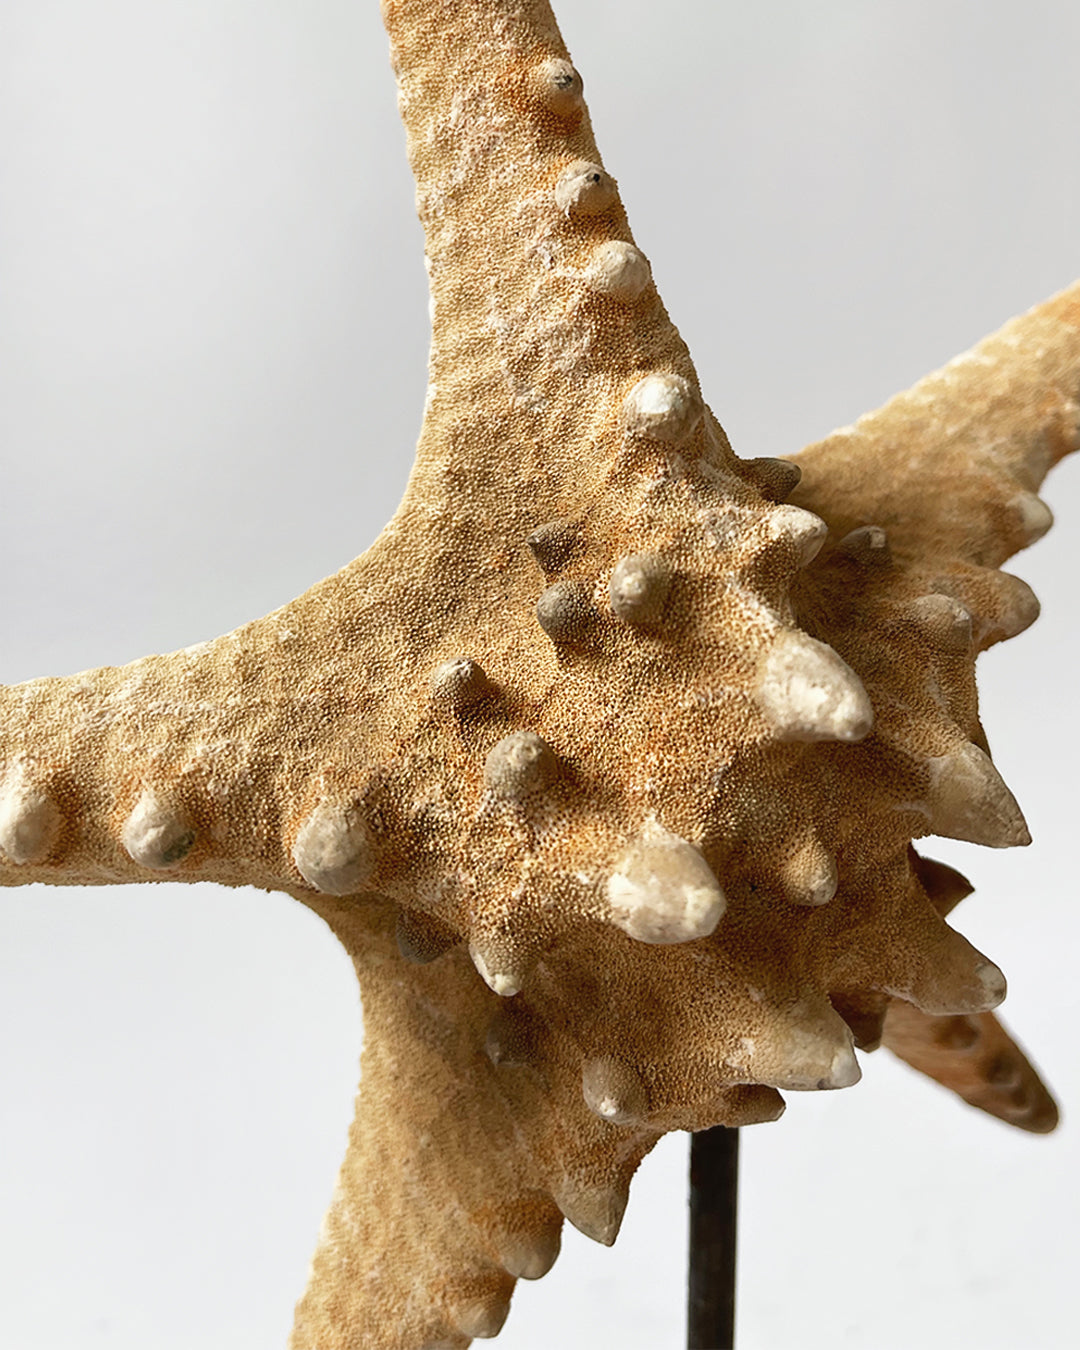 Starfish Ornament with stand